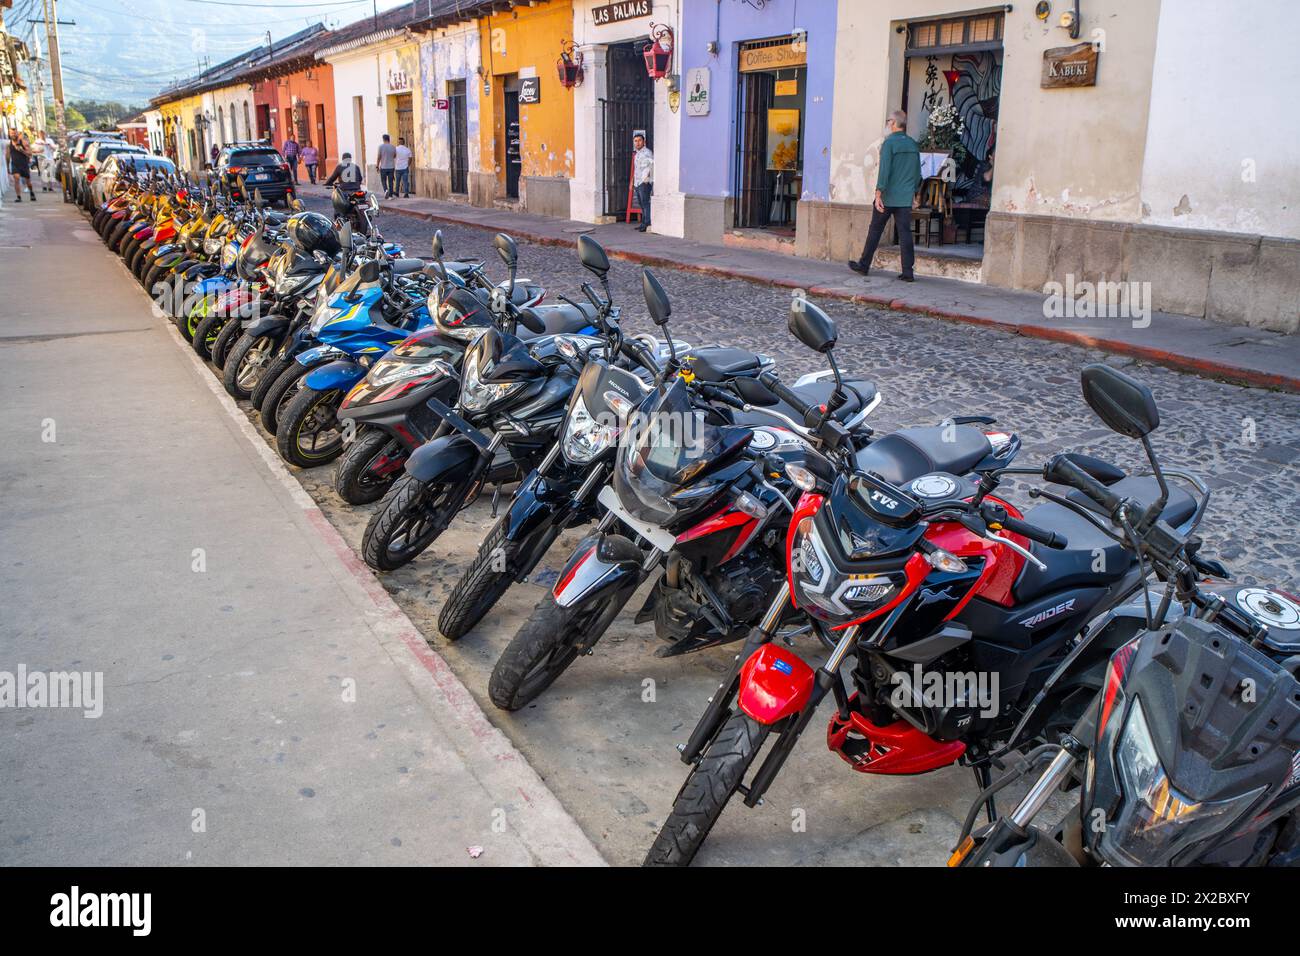 Parked motorcycles in Antugua Guatemala Stock Photo